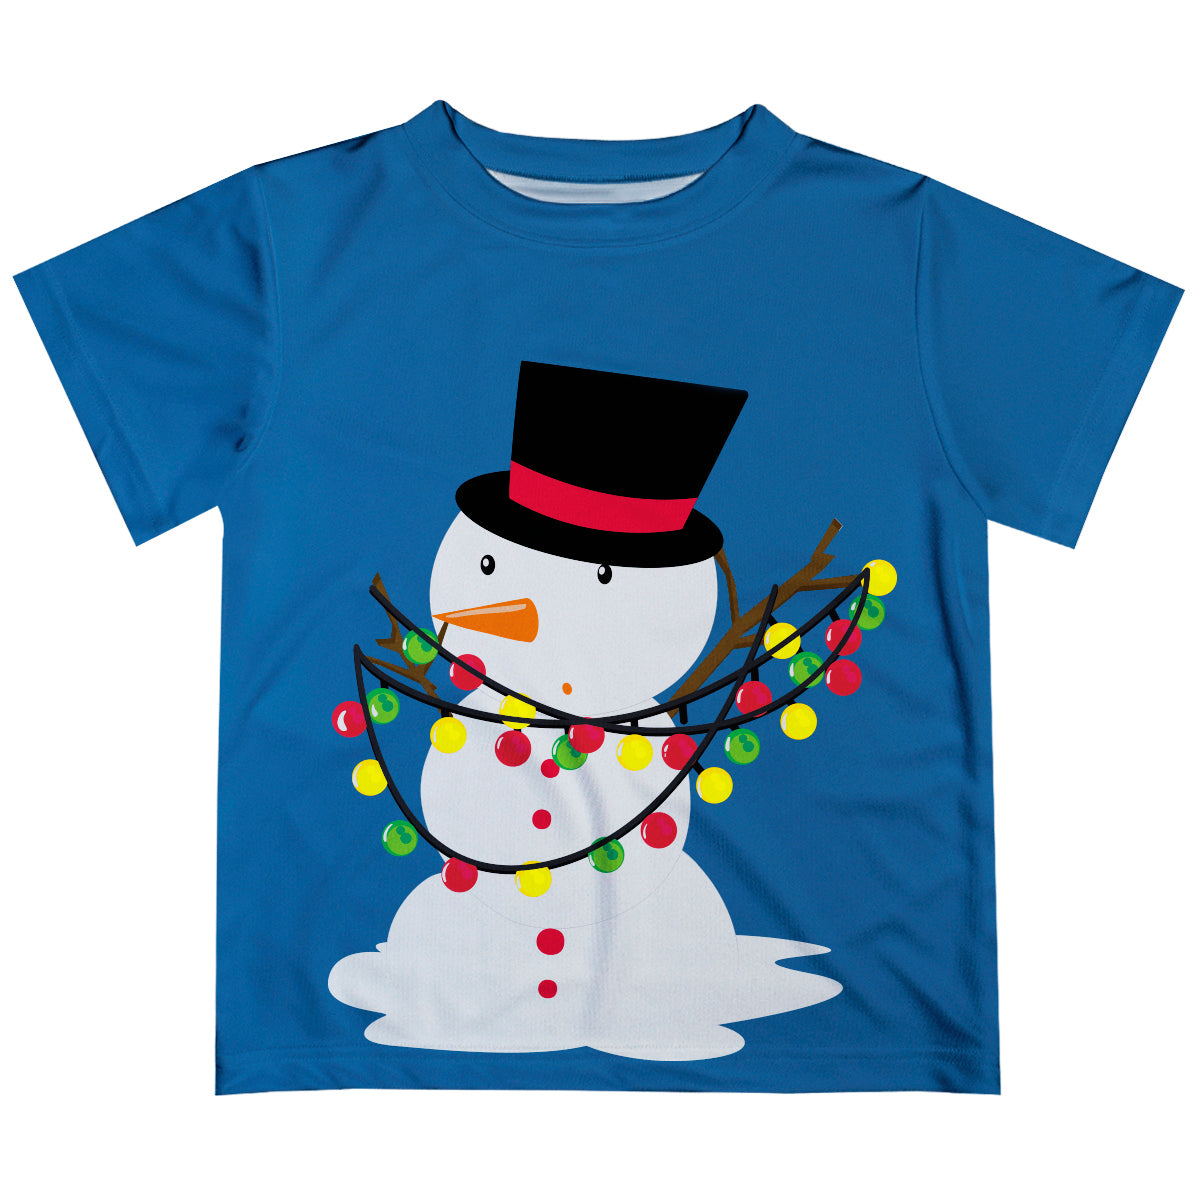 Blue short sleeve tee shirt with snowman and name - Wimziy&Co.